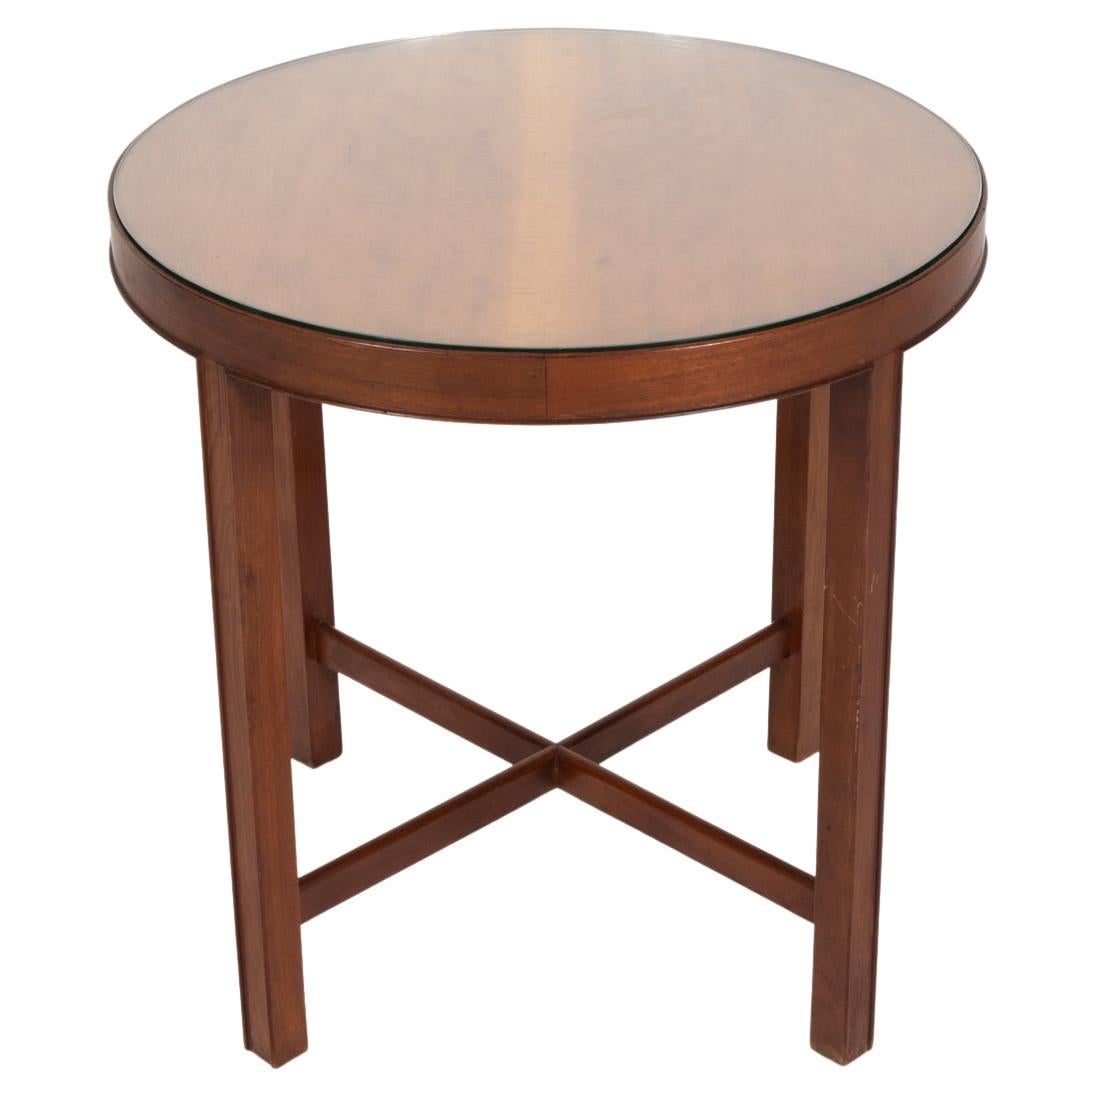 Frits Henningsen Danish Mahogany Round Side Table, c. 1940's For Sale